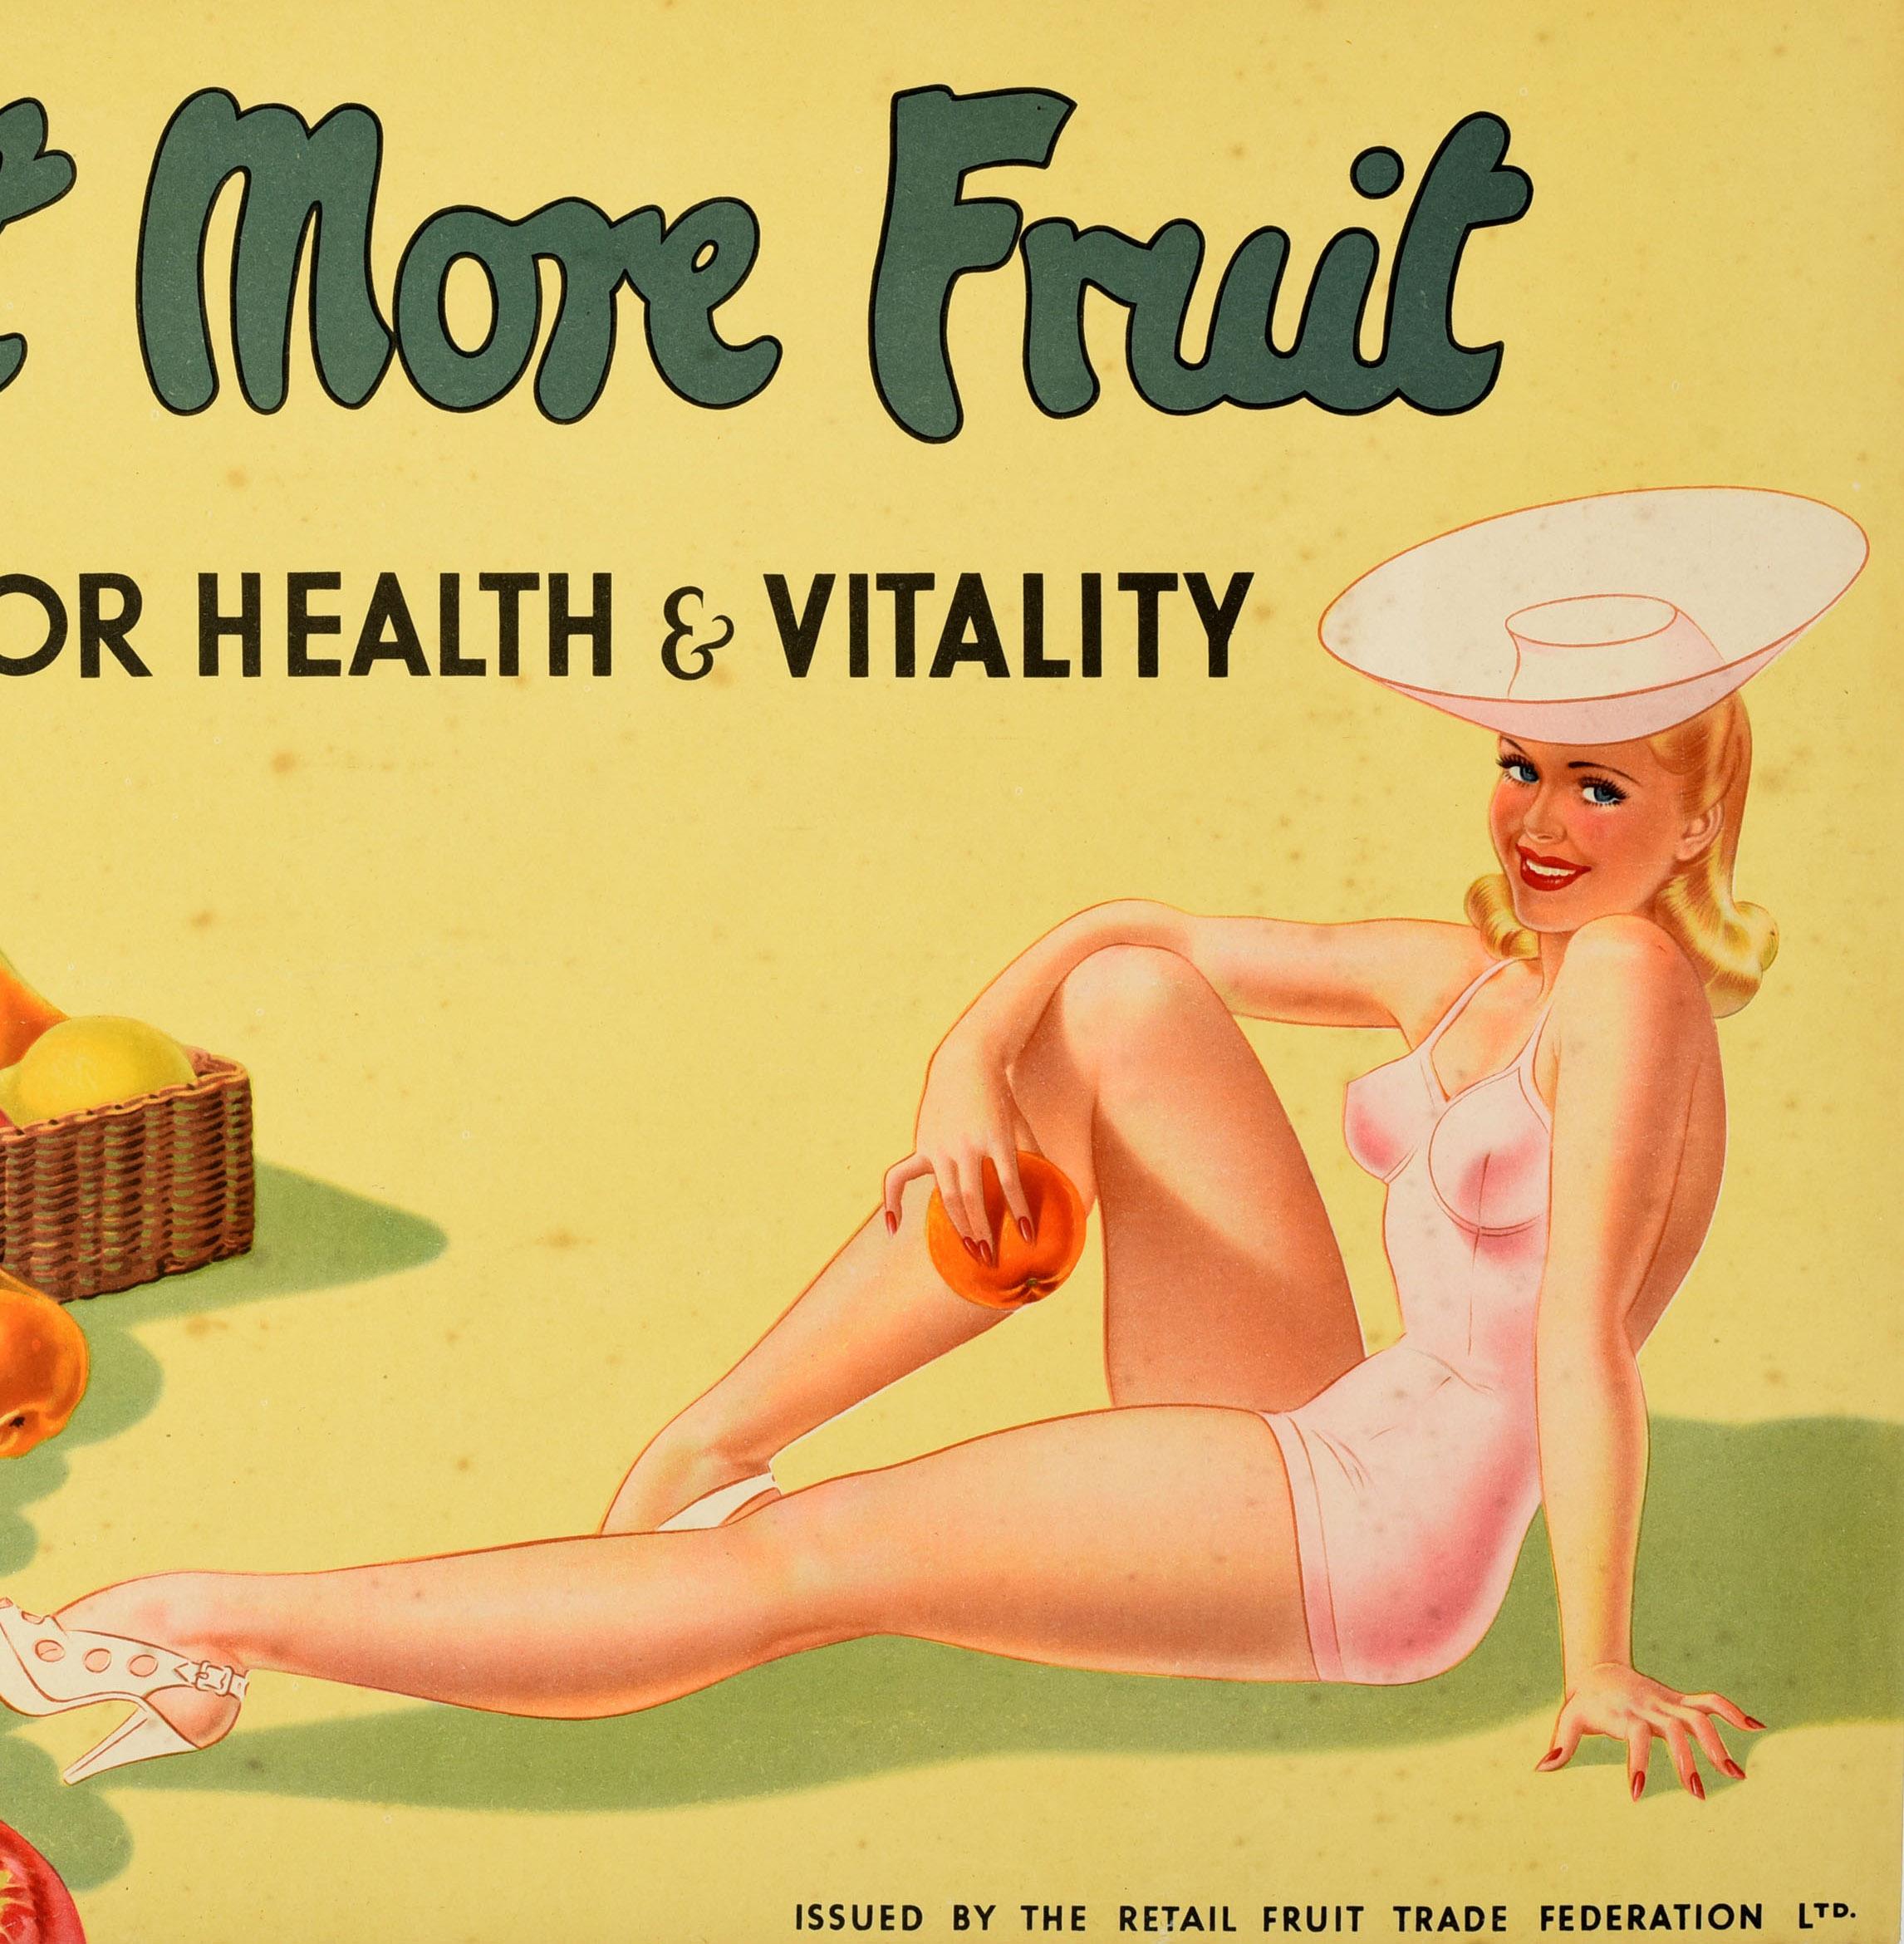 Original vintage food advertising poster - Eat More Fruit for Health and Vitality - featuring a smiling young lady in pin up style artwork wearing a fashionable pink swimming costume, sun hat and heeled shoes against the yellow background, a hamper